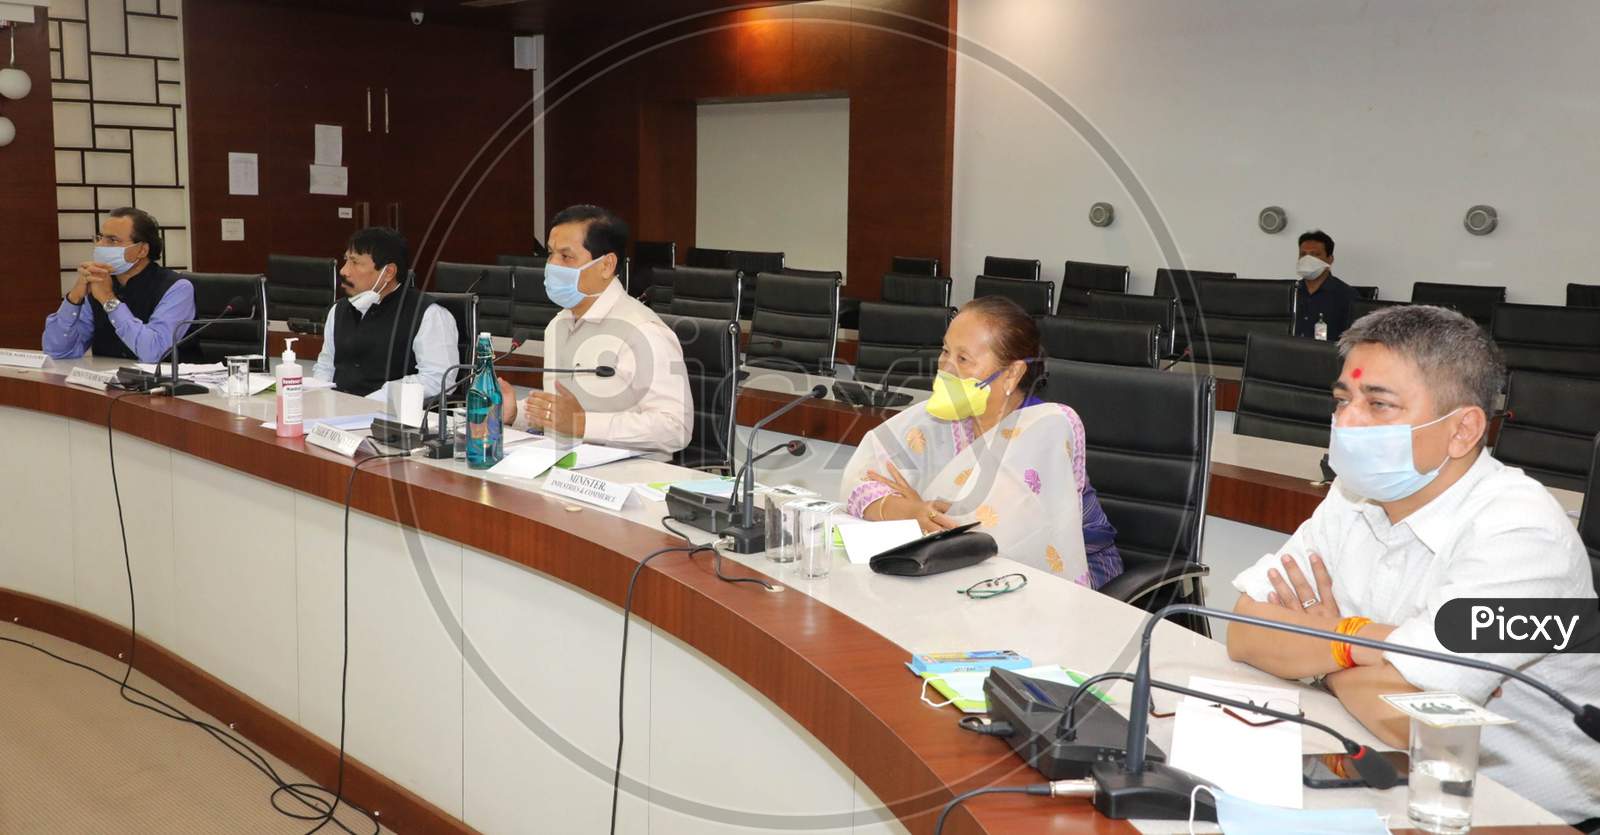 Assam Chief Minister Sarbananda Sonowal In A Meeting To Discuss Economic Issues Of State  During Nationwide Lockdown Amidst Coronavirus or COVID-19 Pandemic In Guwahati On April 28, 2020